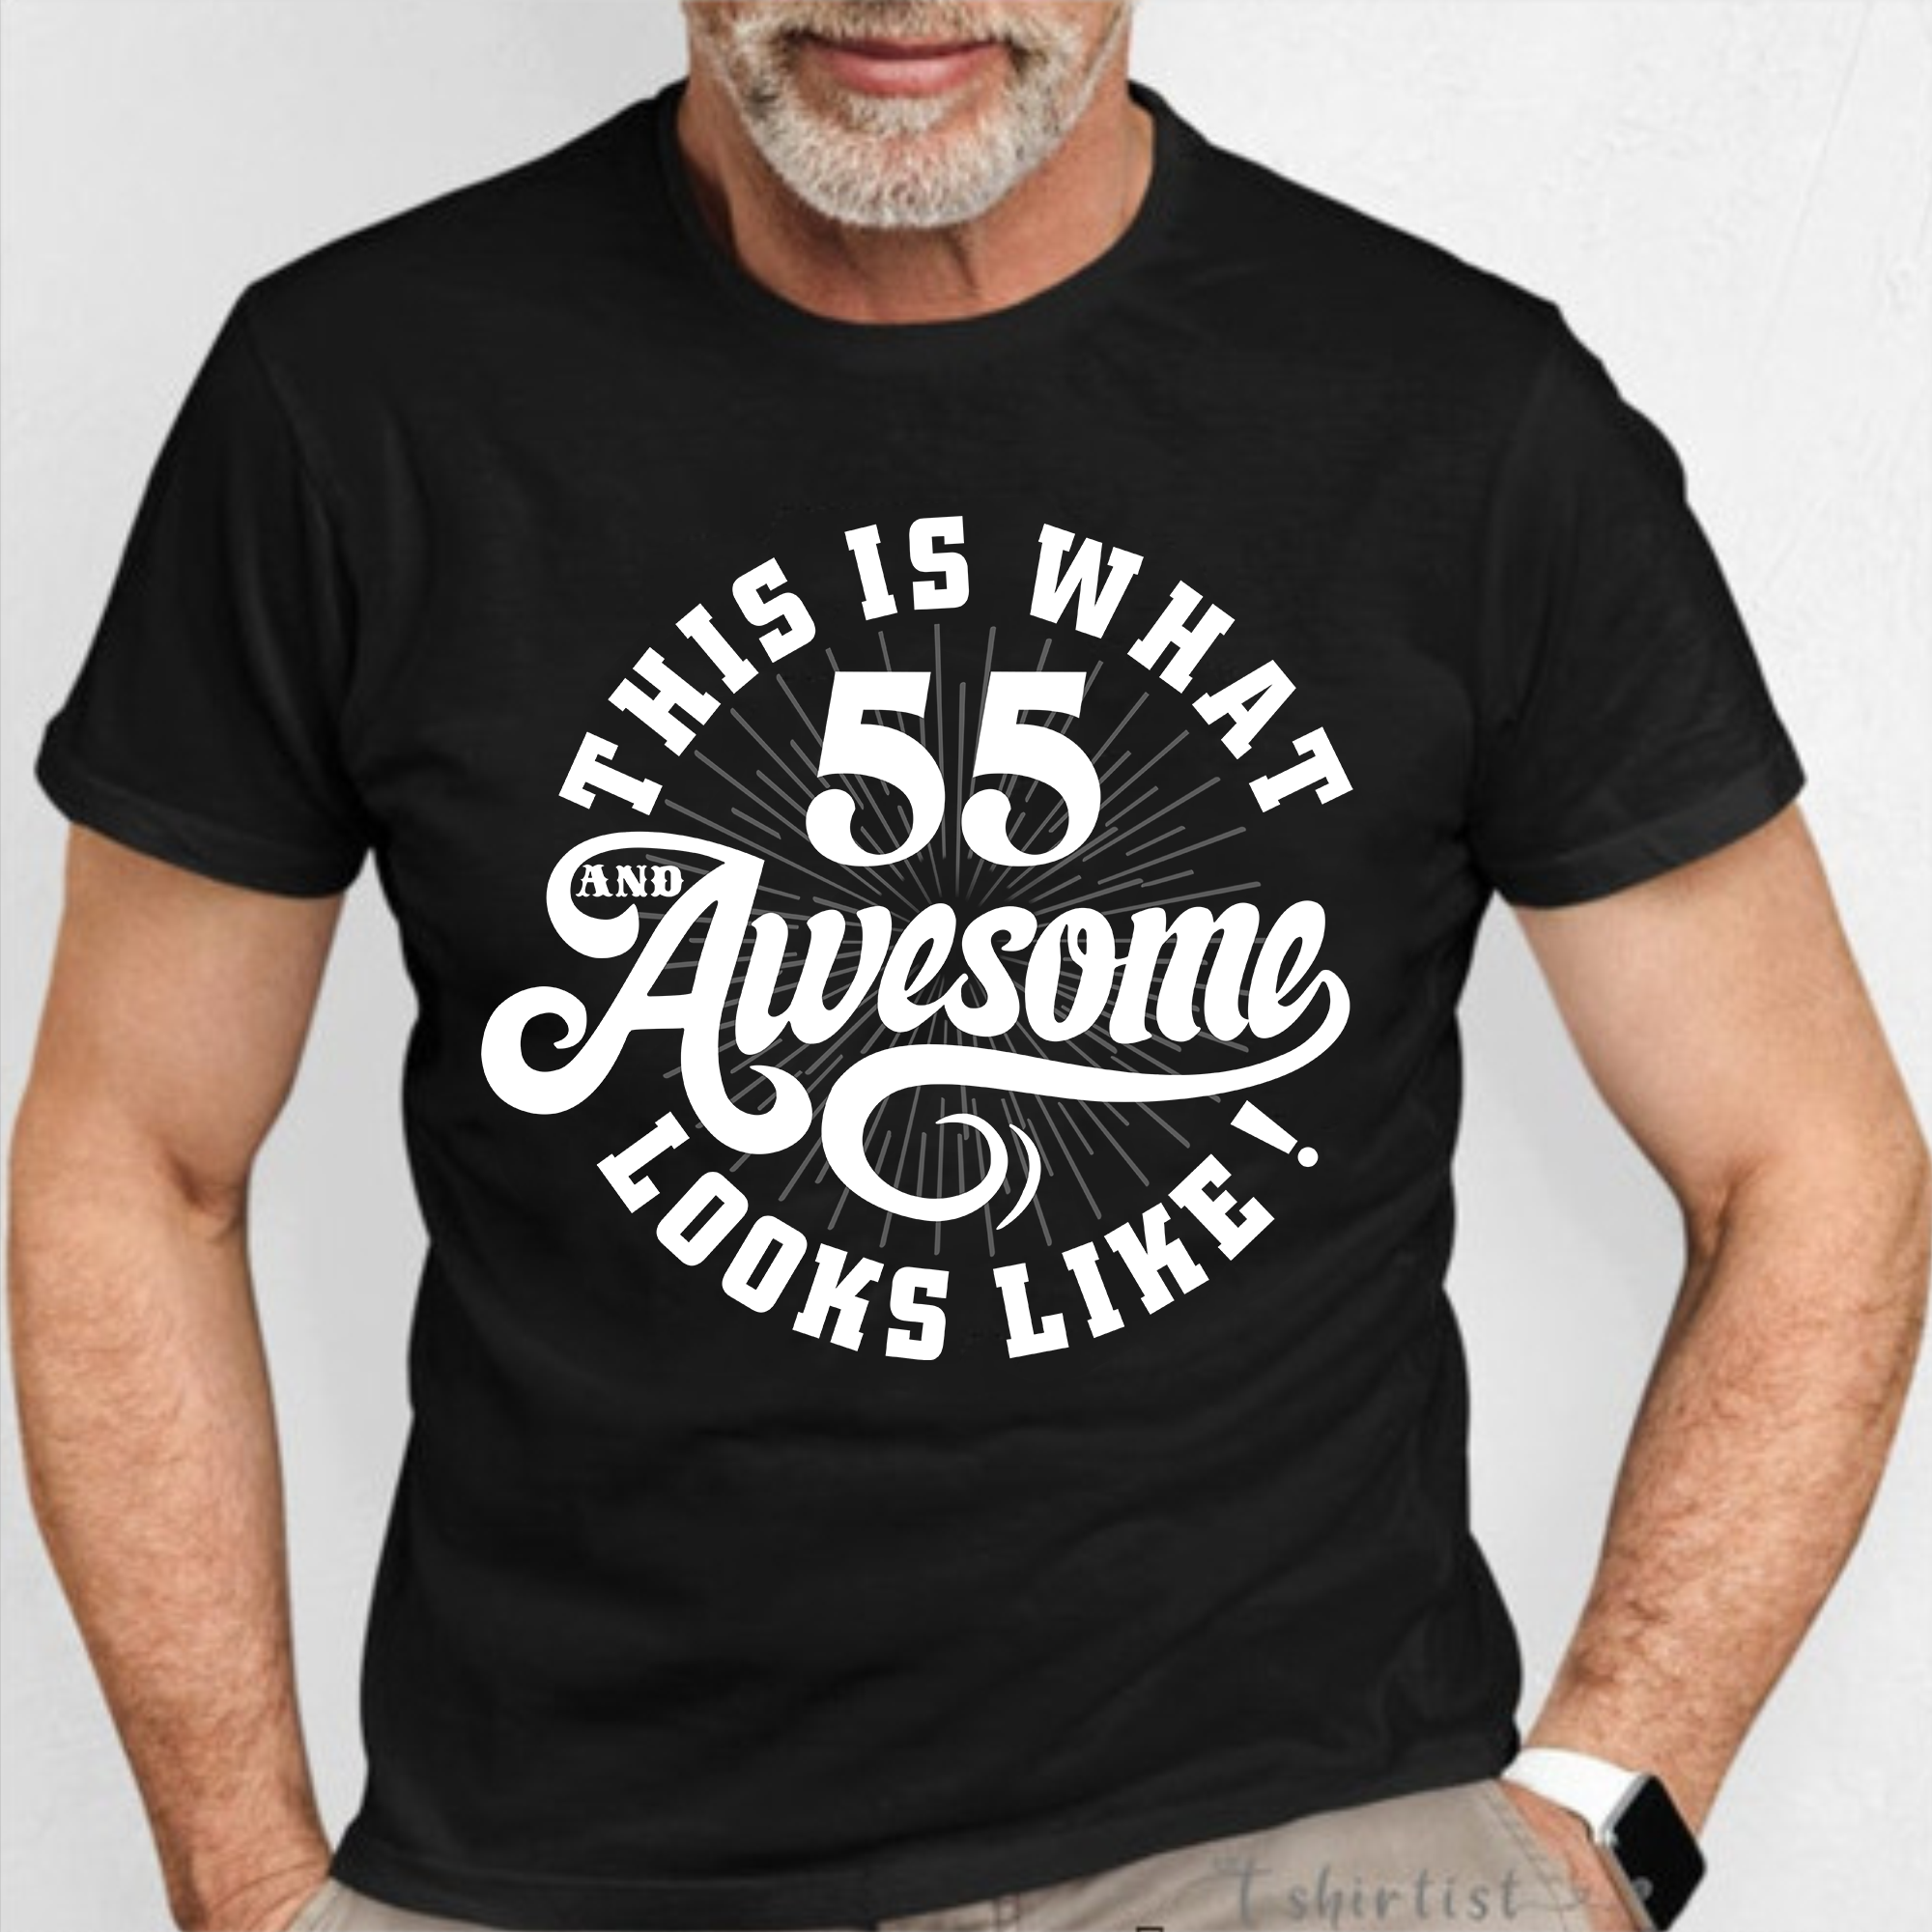 This Is What 55 Awesome Looks Like – Happy 55th Birthday Shirt